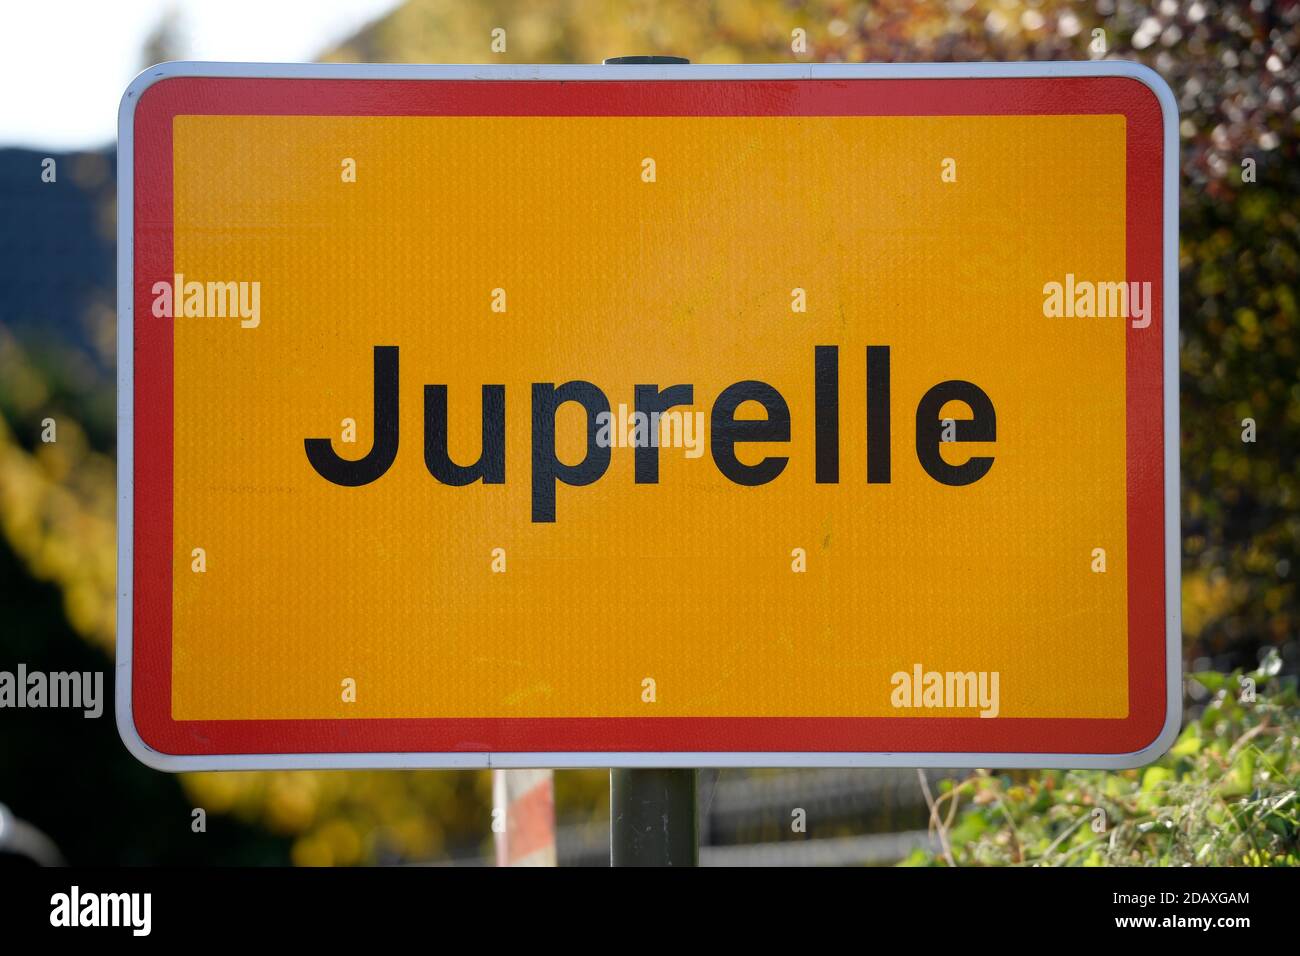 Illustration shows the name of the Juprelle municipality on a road sign, Tuesday 18 September 2018. BELGA PHOTO YORICK JANSENS Stock Photo